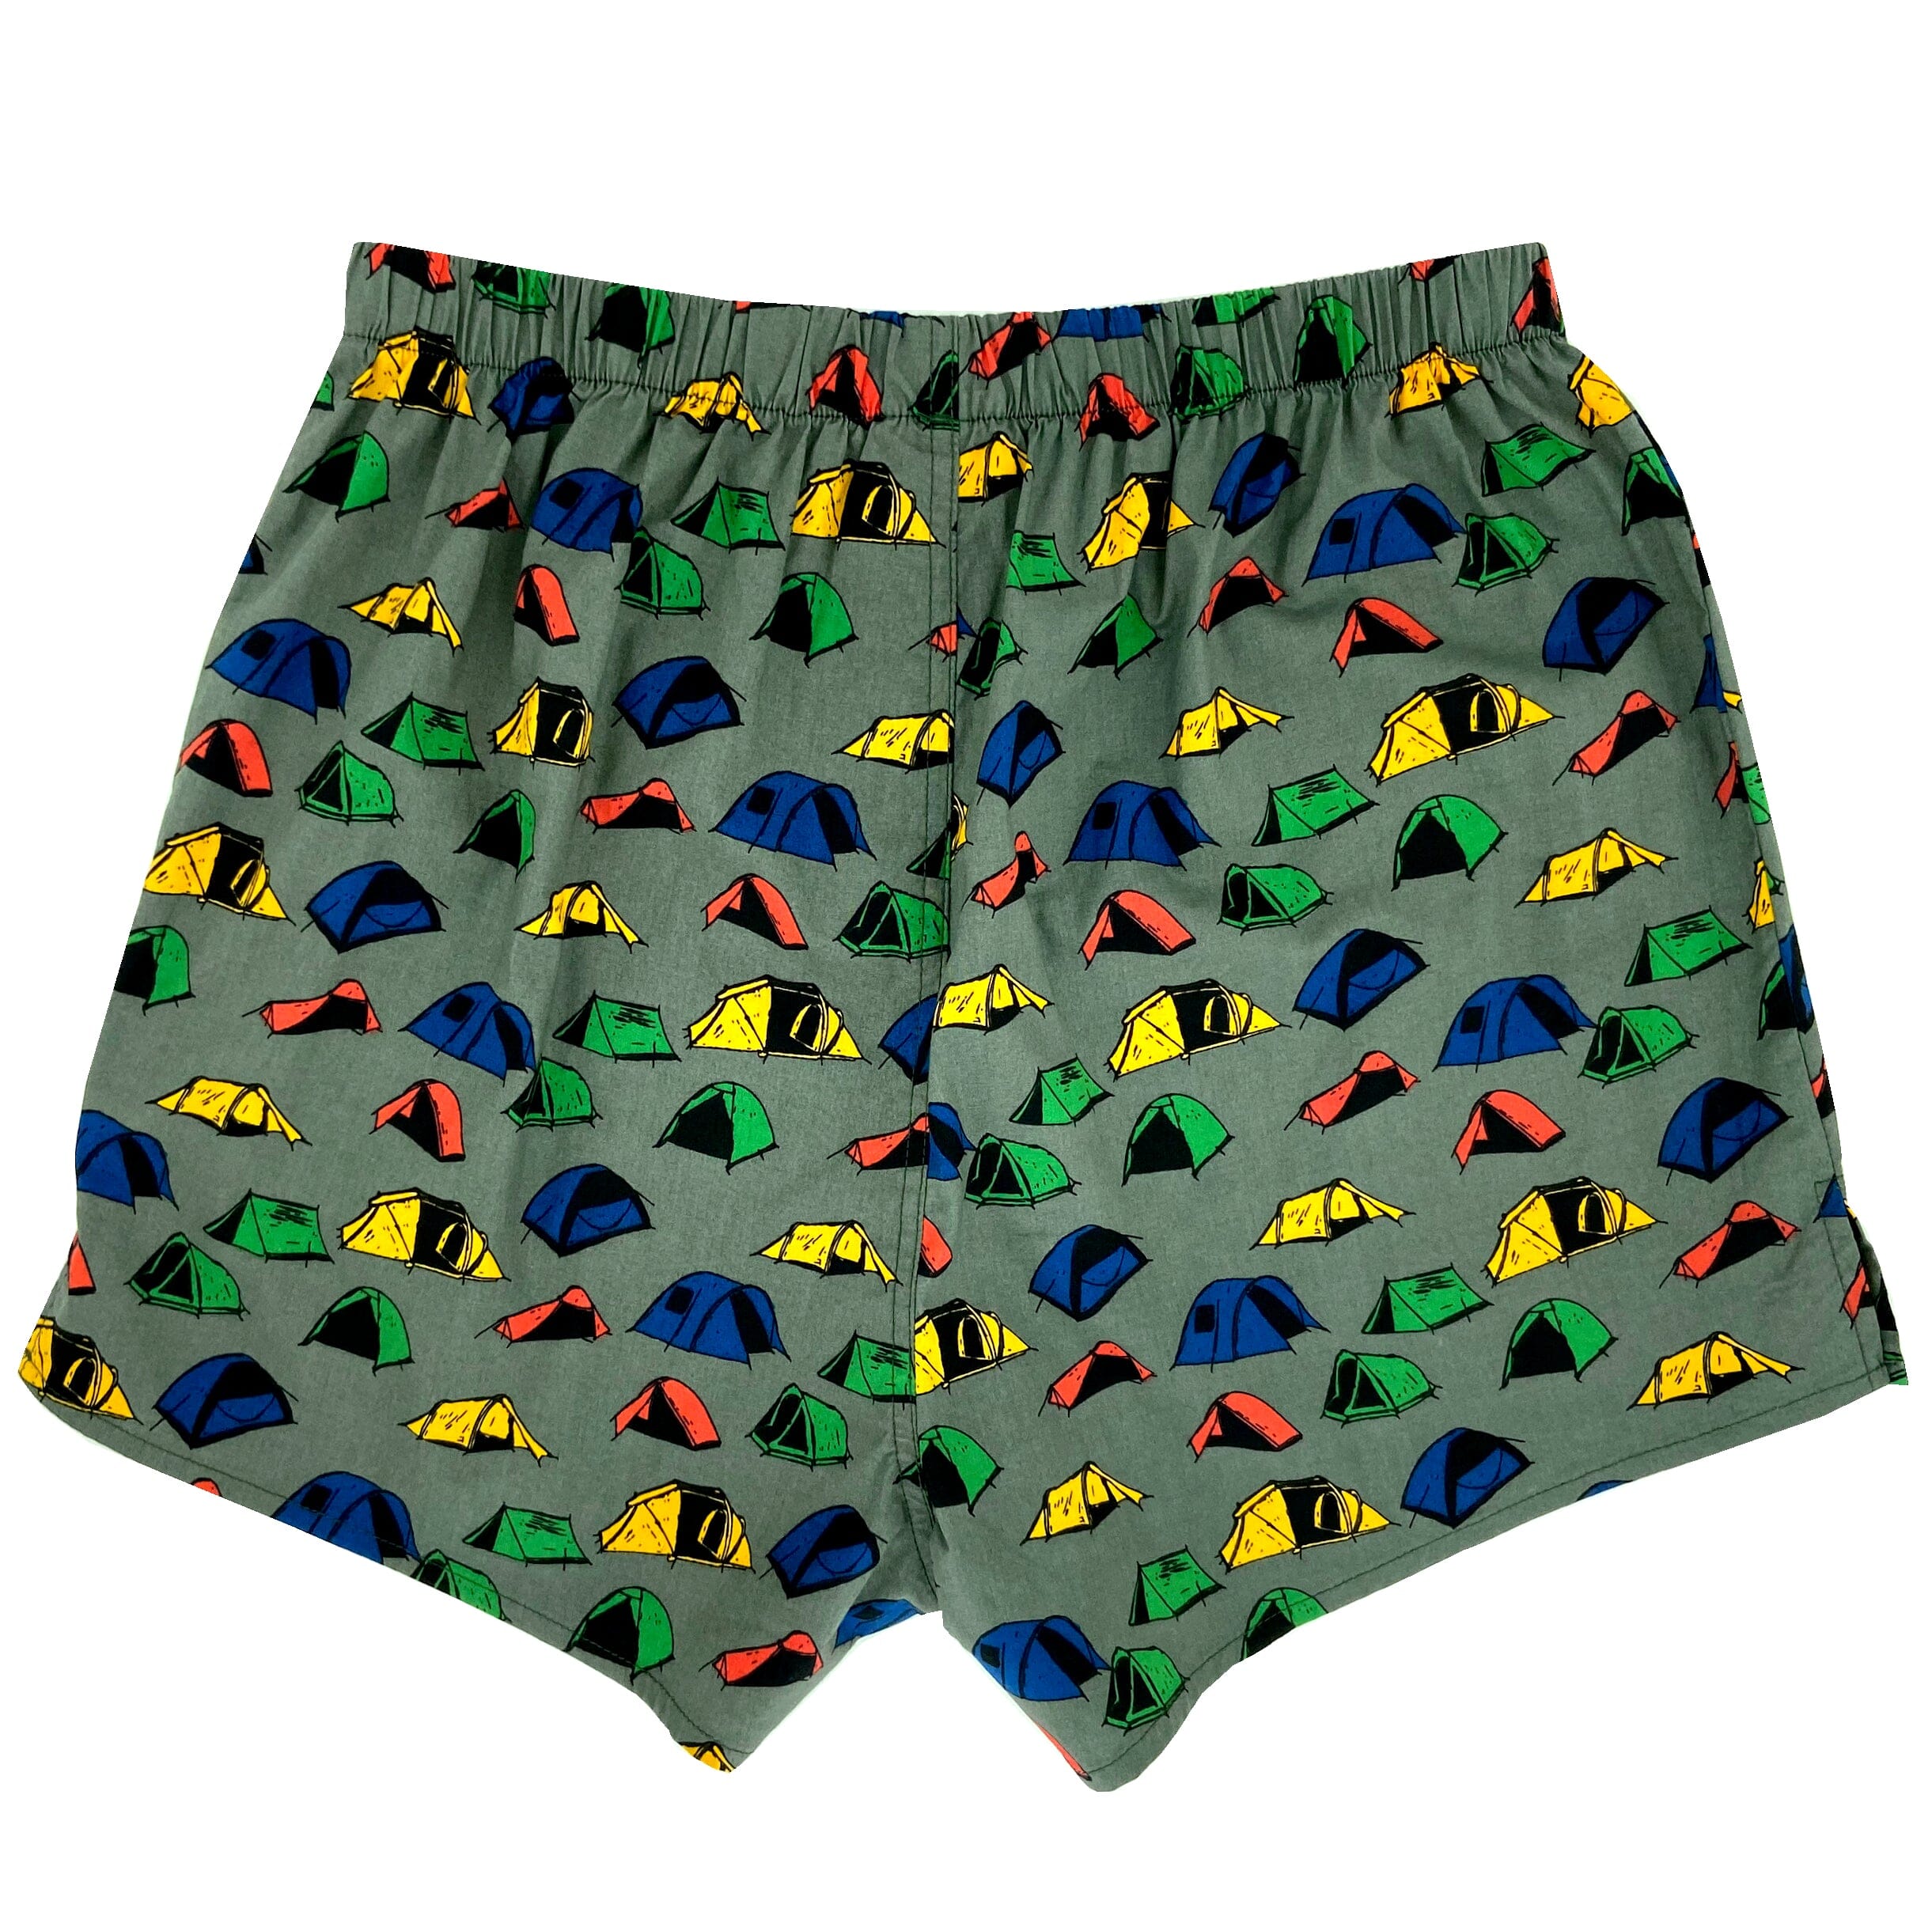 Men's Outdoorsy Camping Tent Patterned Novelty Print Boxer Shorts